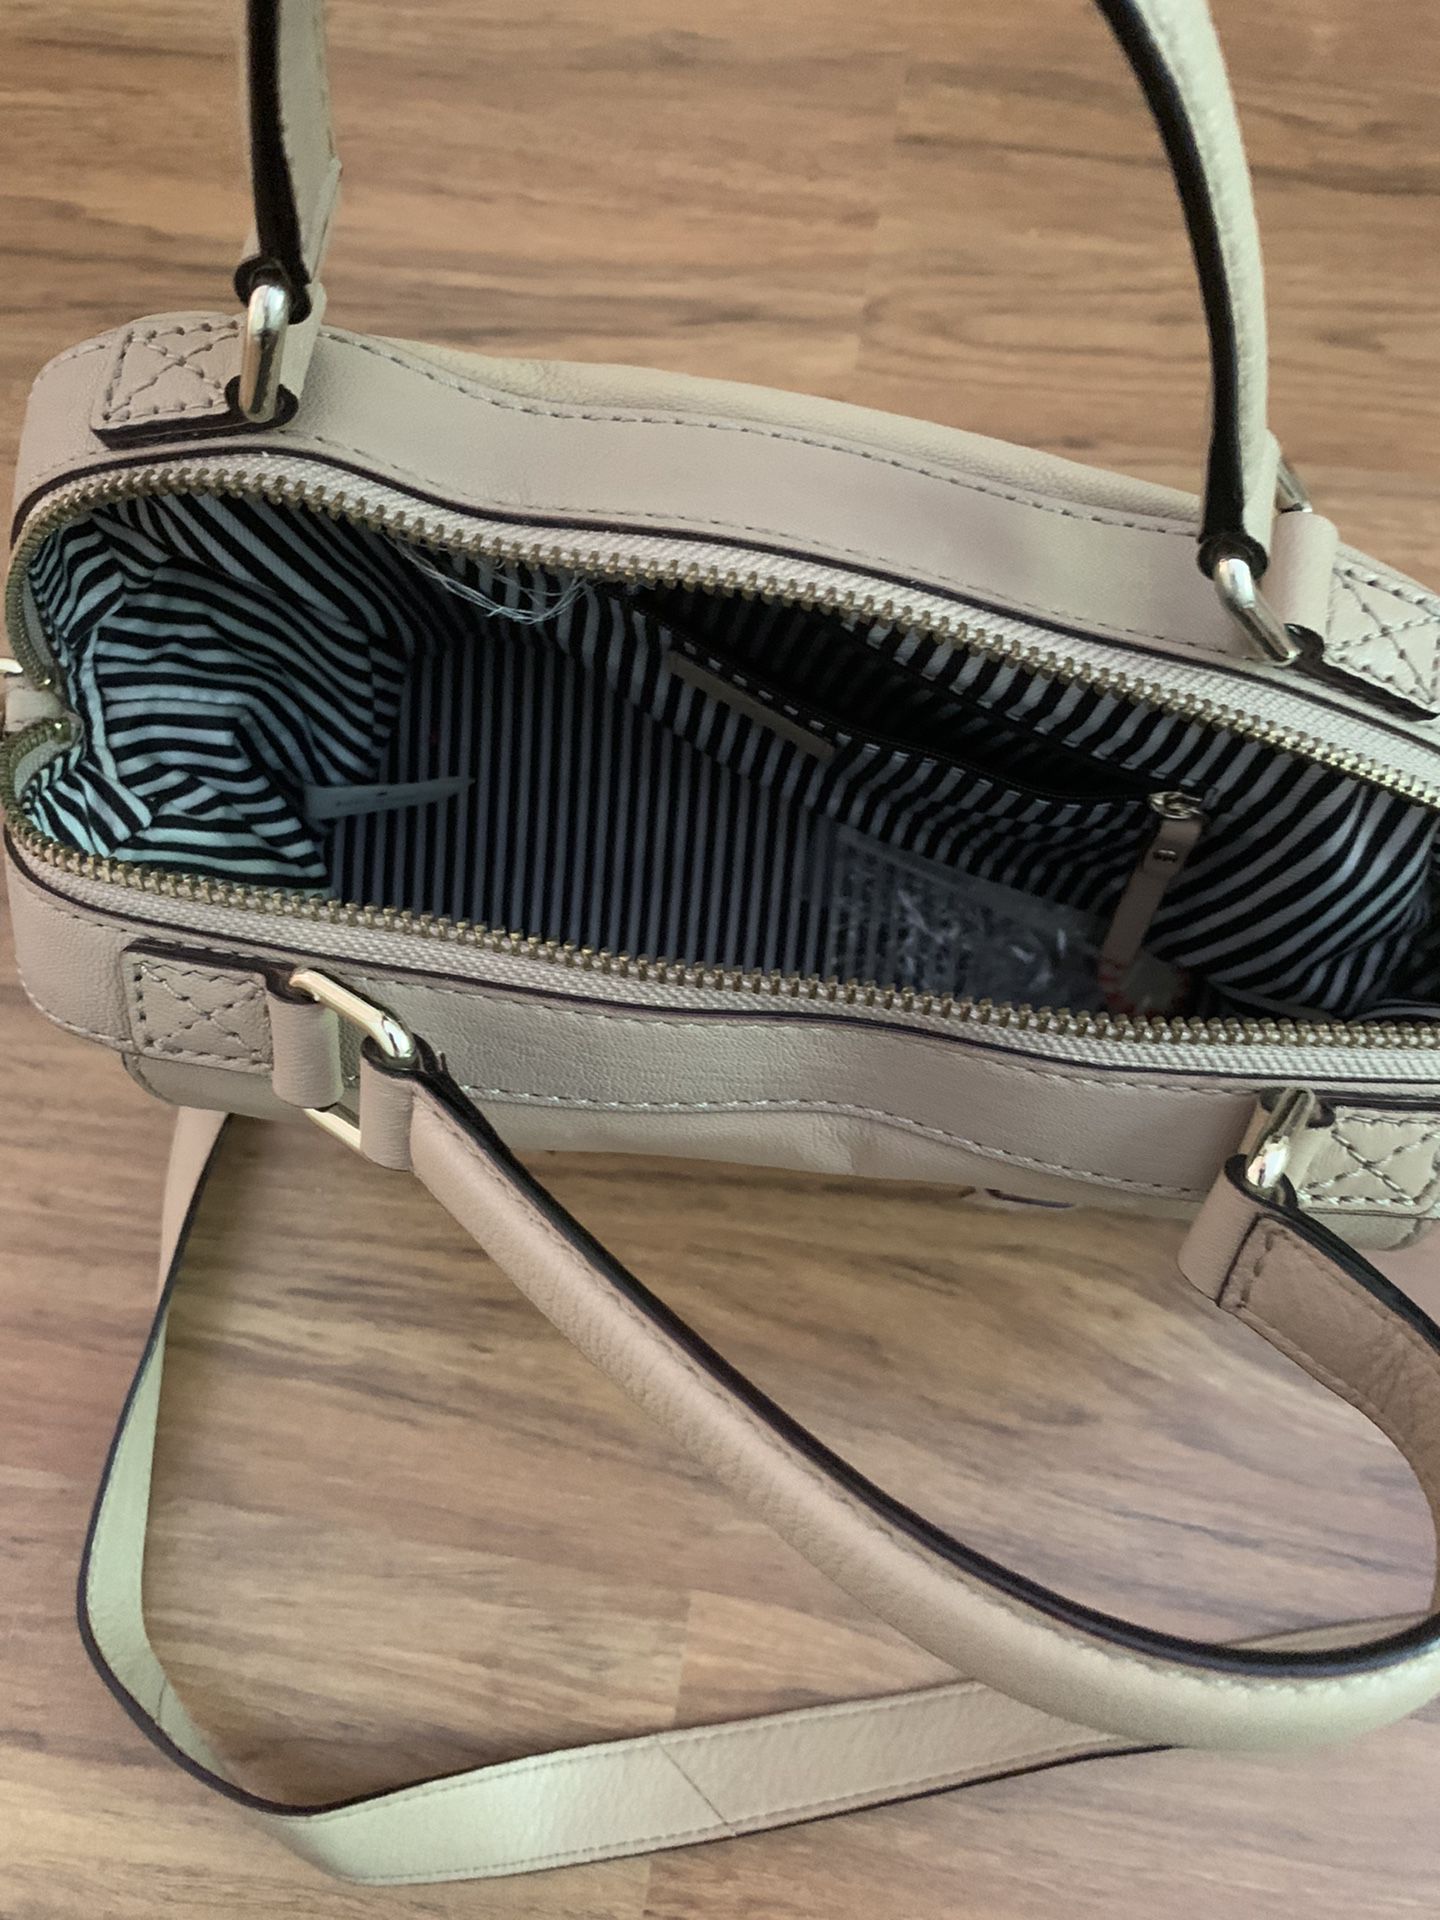 Kate Spade Leather Purse for Sale in Aventura, FL - OfferUp